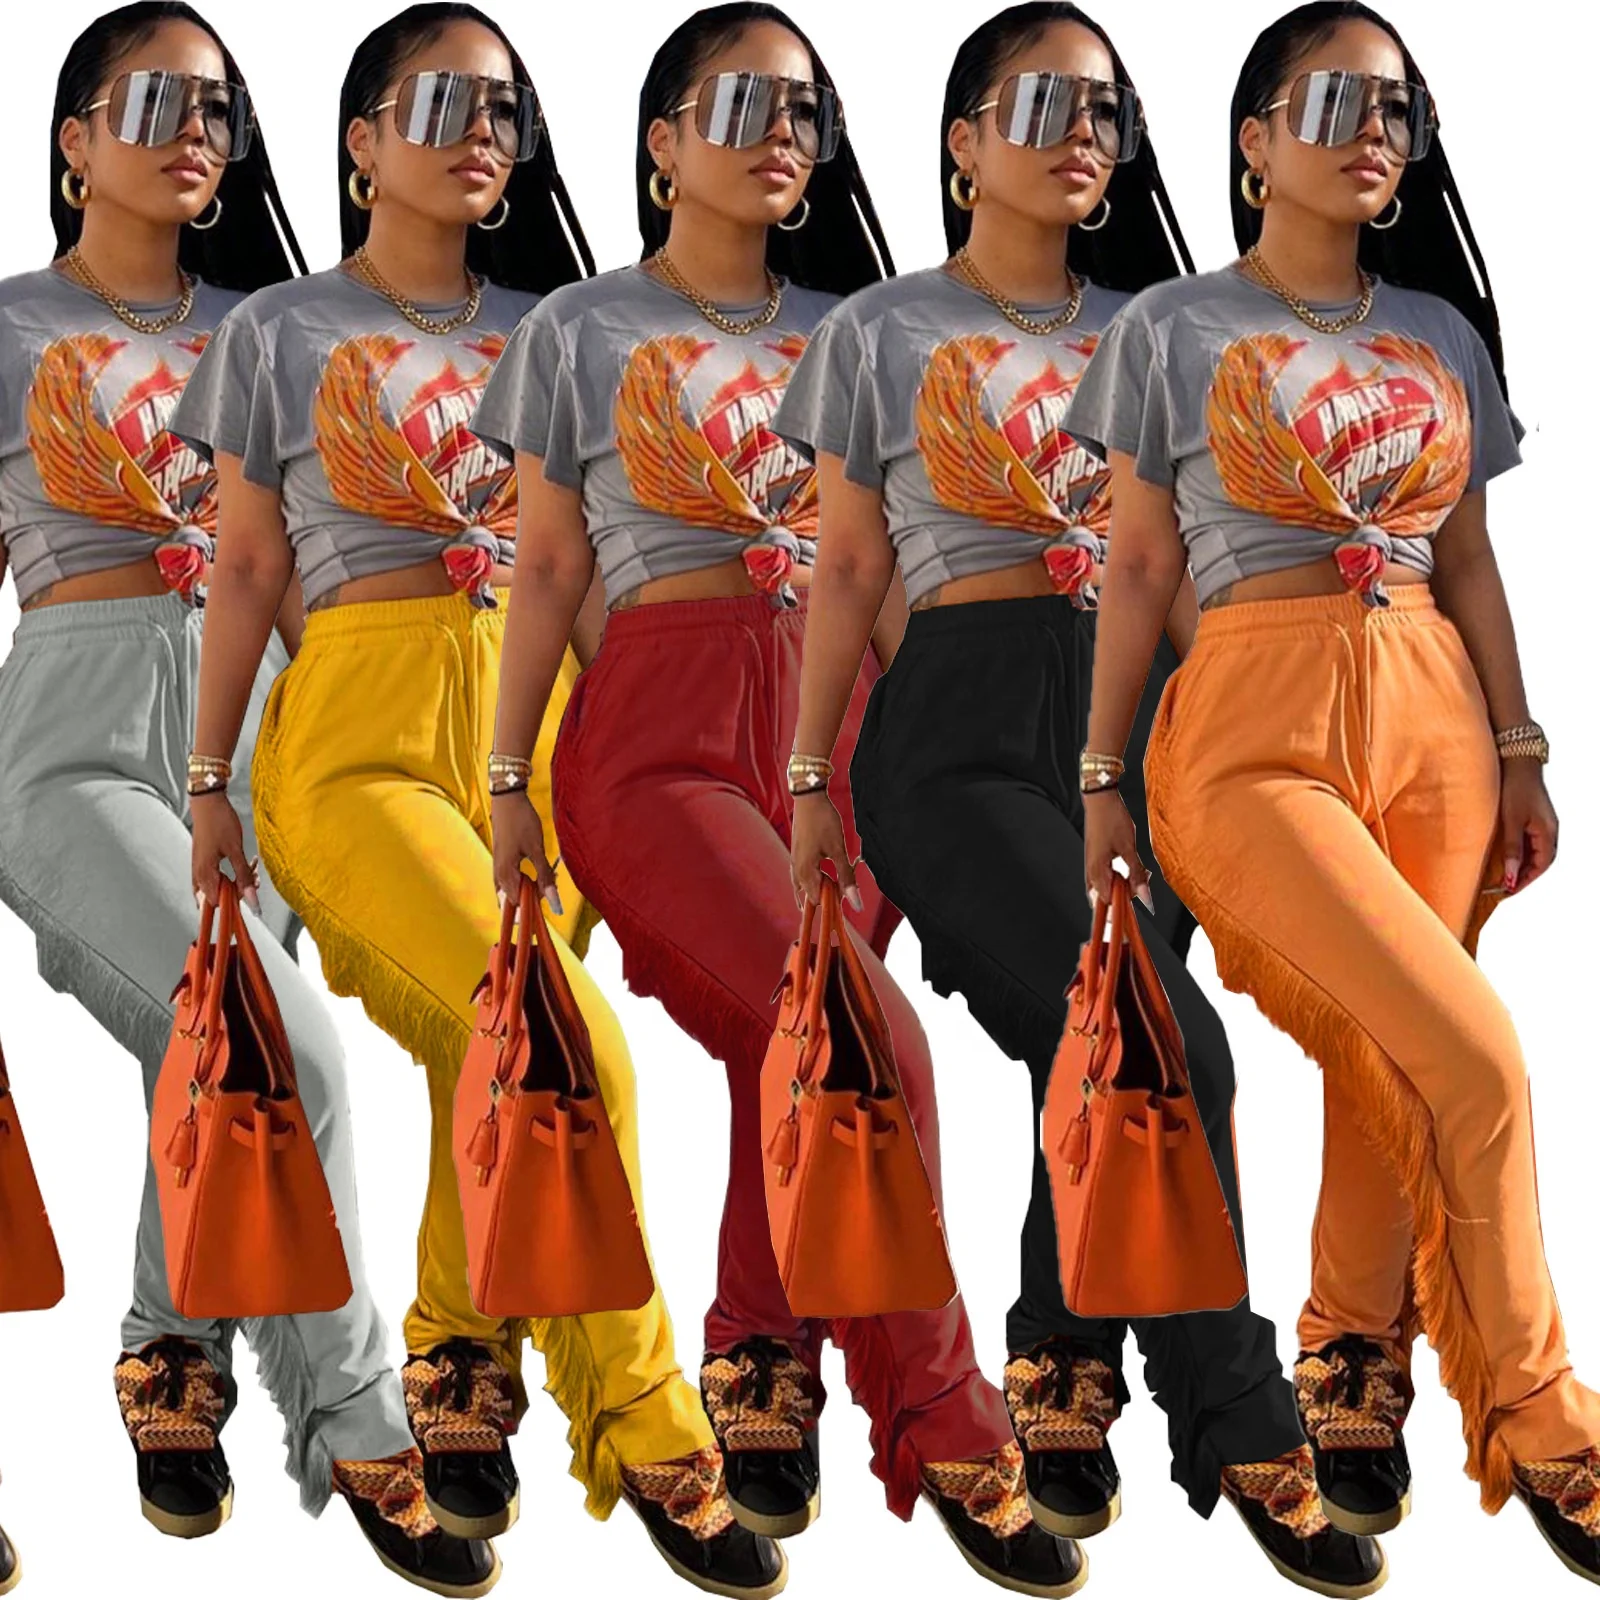 

OUDINA Hot Selling Fashion Casual Solid Color Split Tassel Casual Pants Fringed Trousers Fringe Joggers, Red/black/yellow/gray/orange